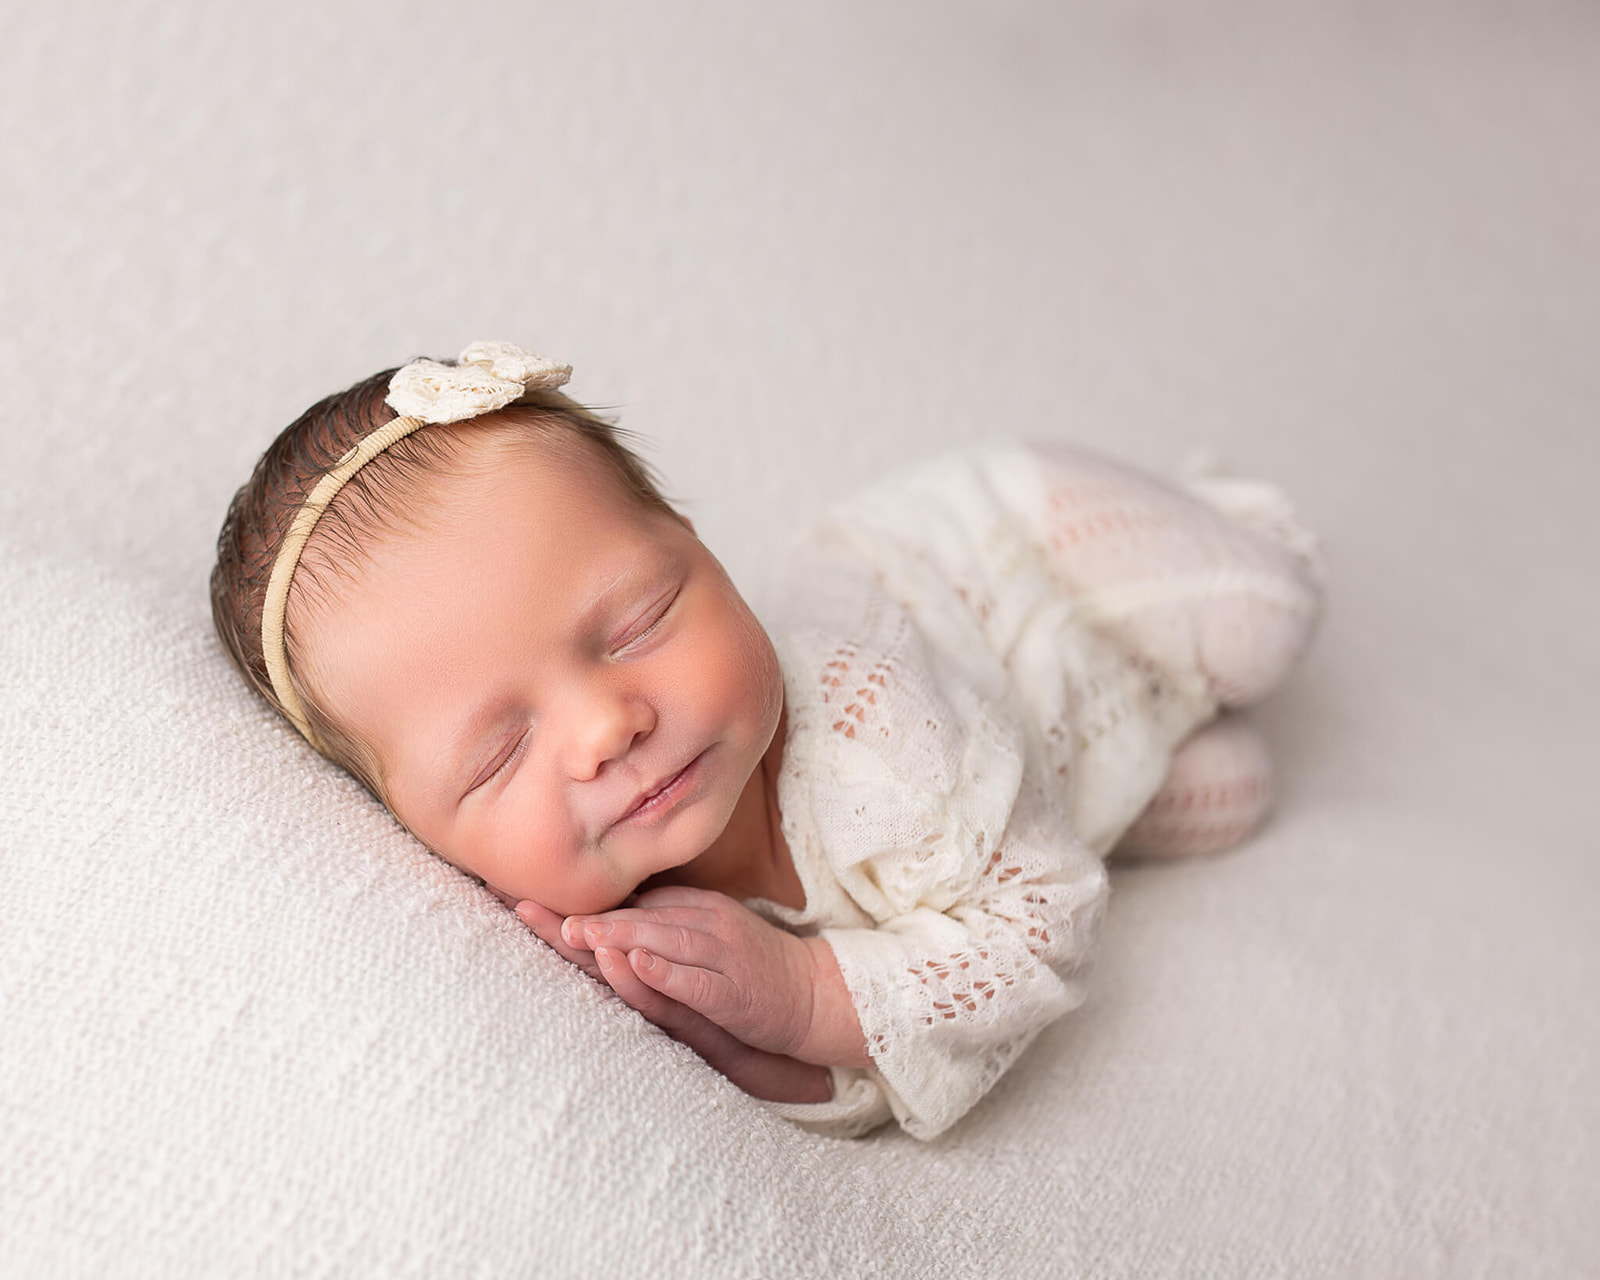 sleeping newborn with praying hands in white outfit during newborn photography session